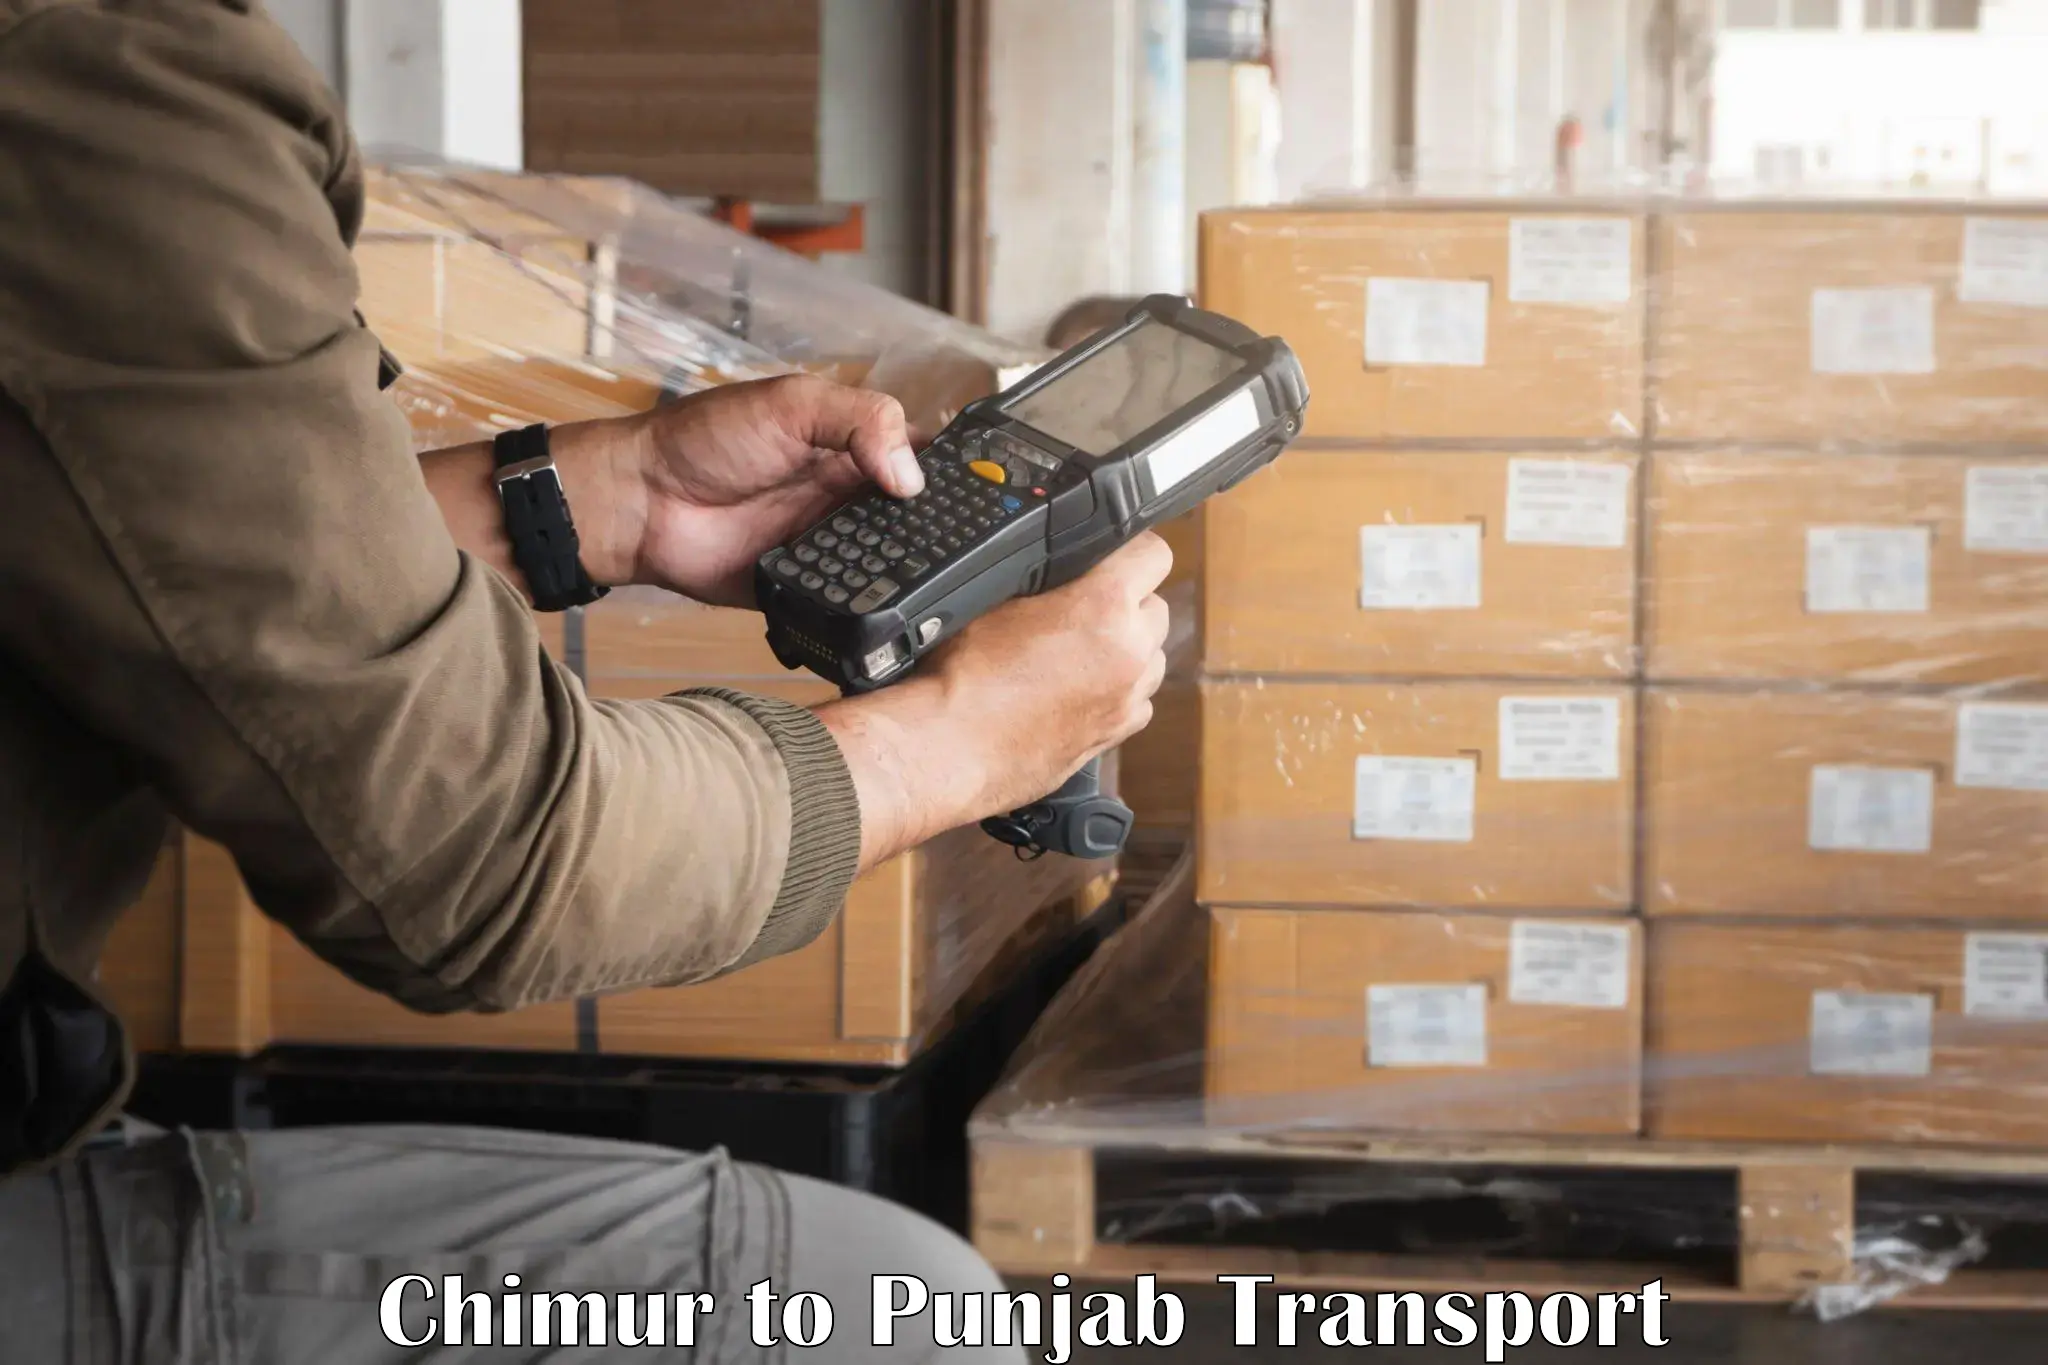 Air cargo transport services Chimur to Tarsikka